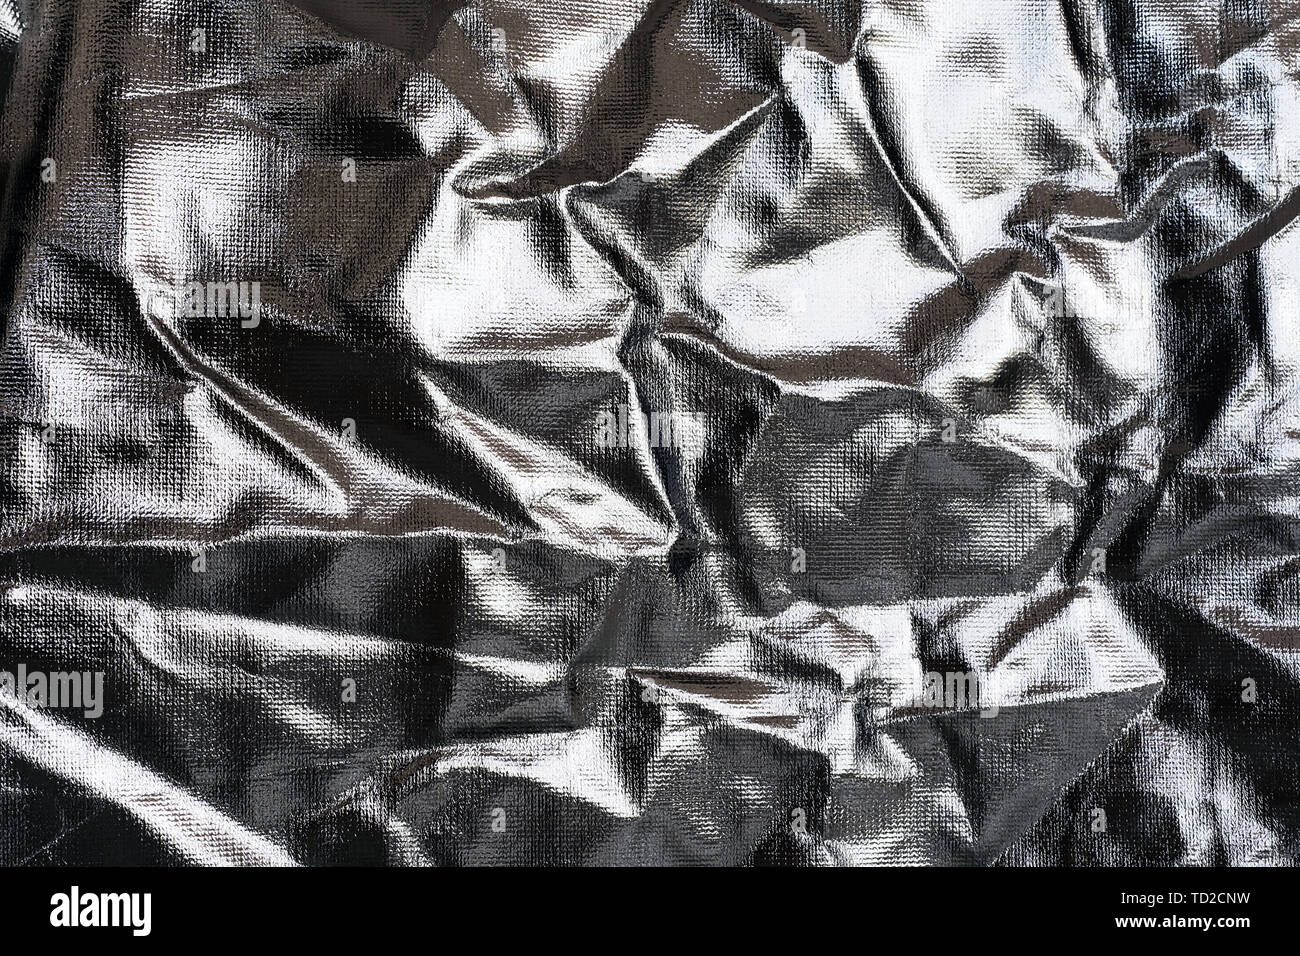 Textured silver foil background with shiny crumpled surface. Stock Photo